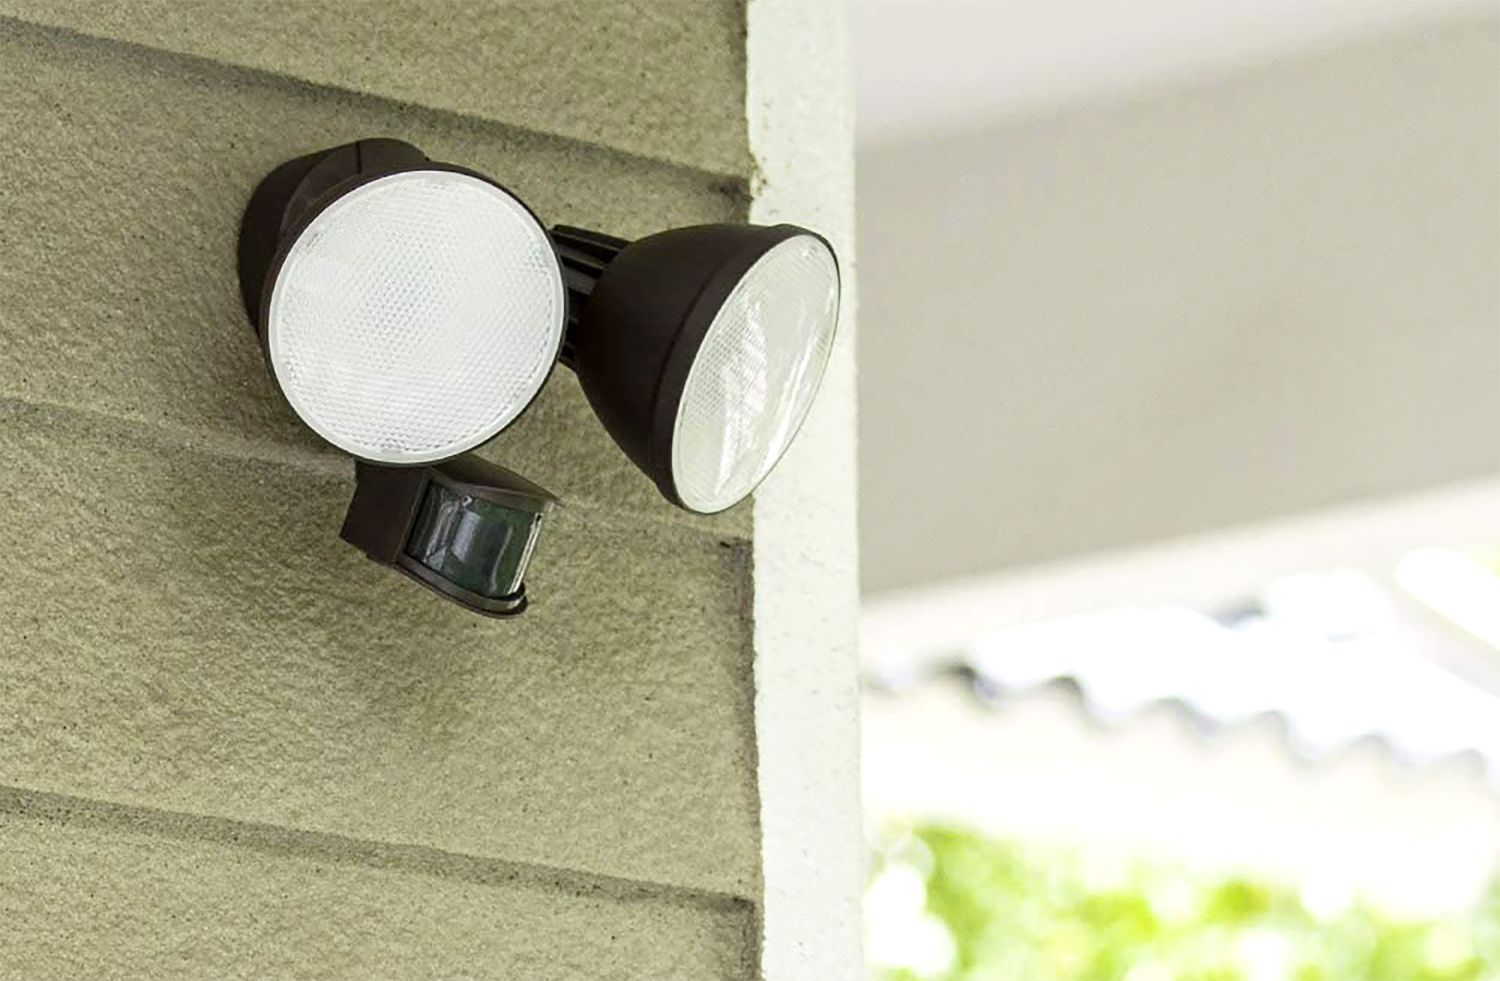 The Best Outdoor Motion Sensor Lights, Are Led Security Lights Any Good